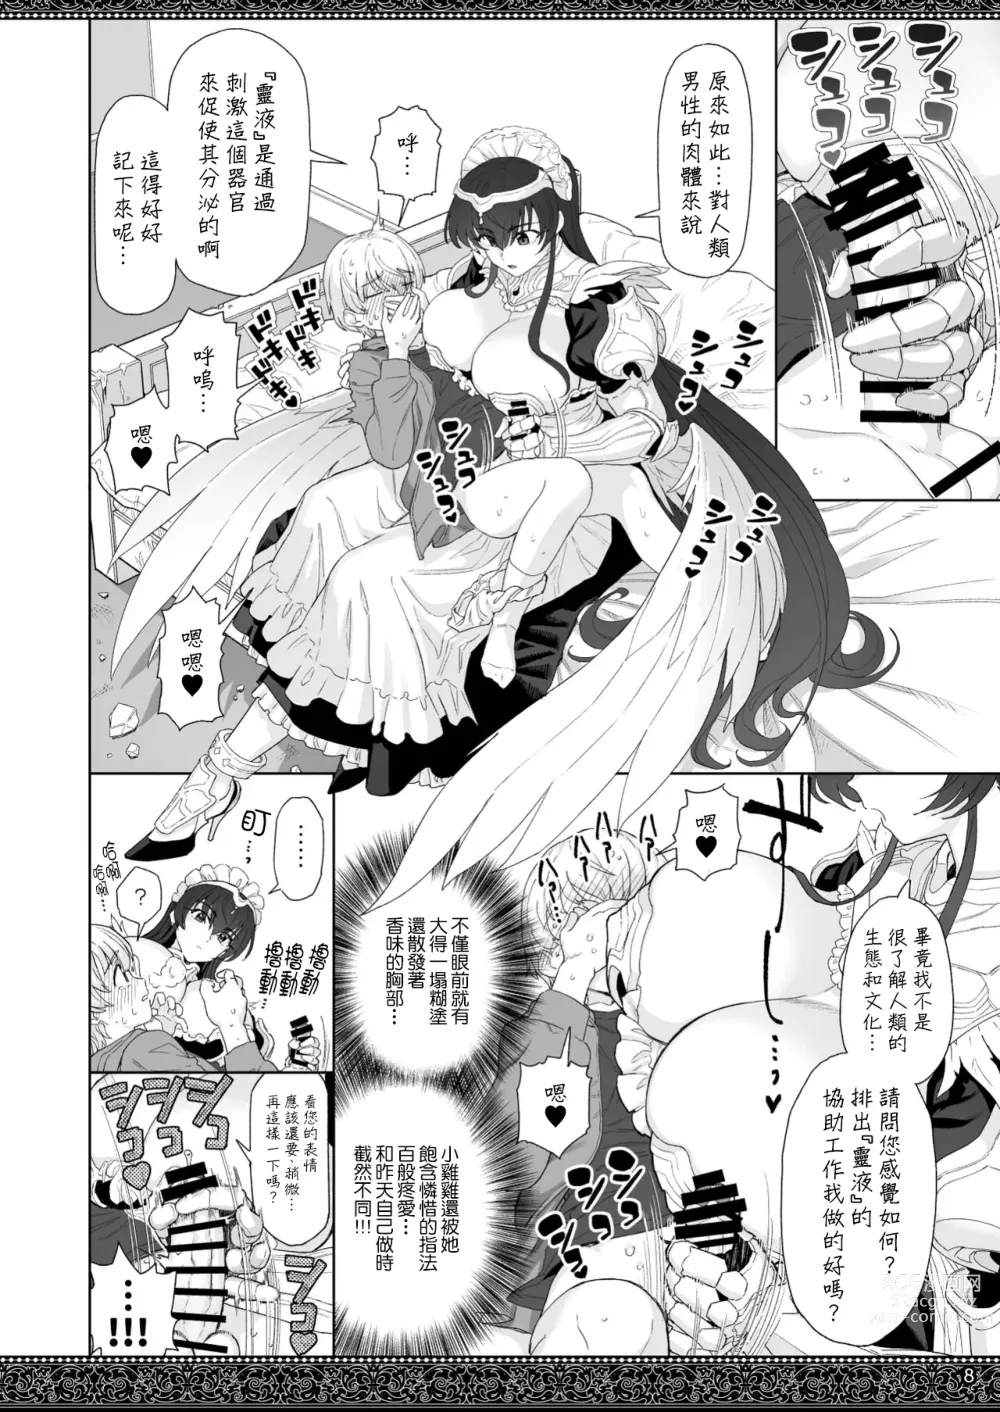 Page 8 of doujinshi 天上世界的女僕們